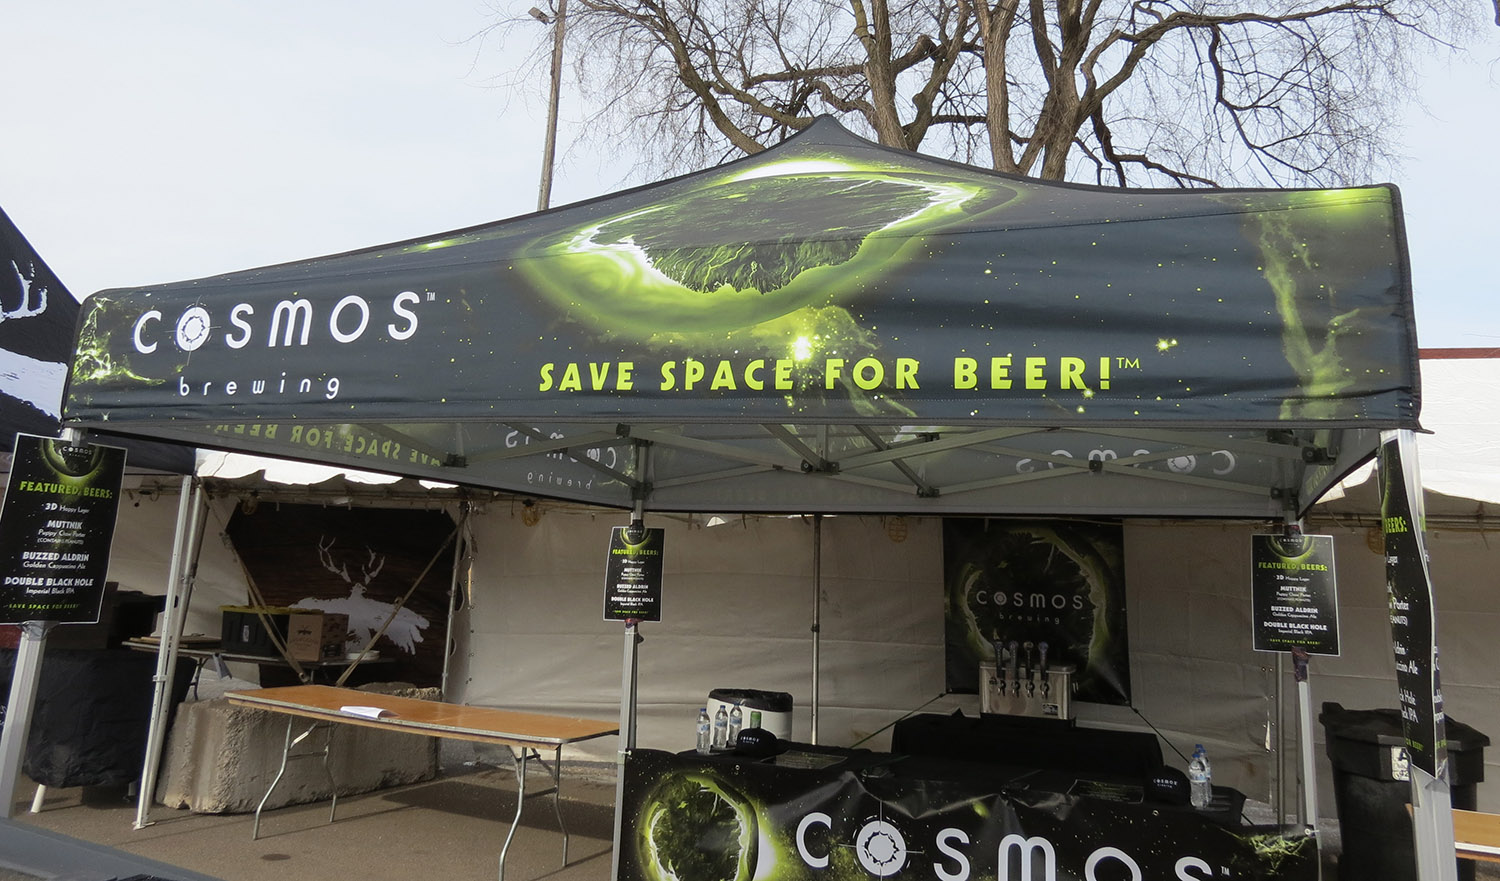 Cosmos booth, trade show design for micro brewery